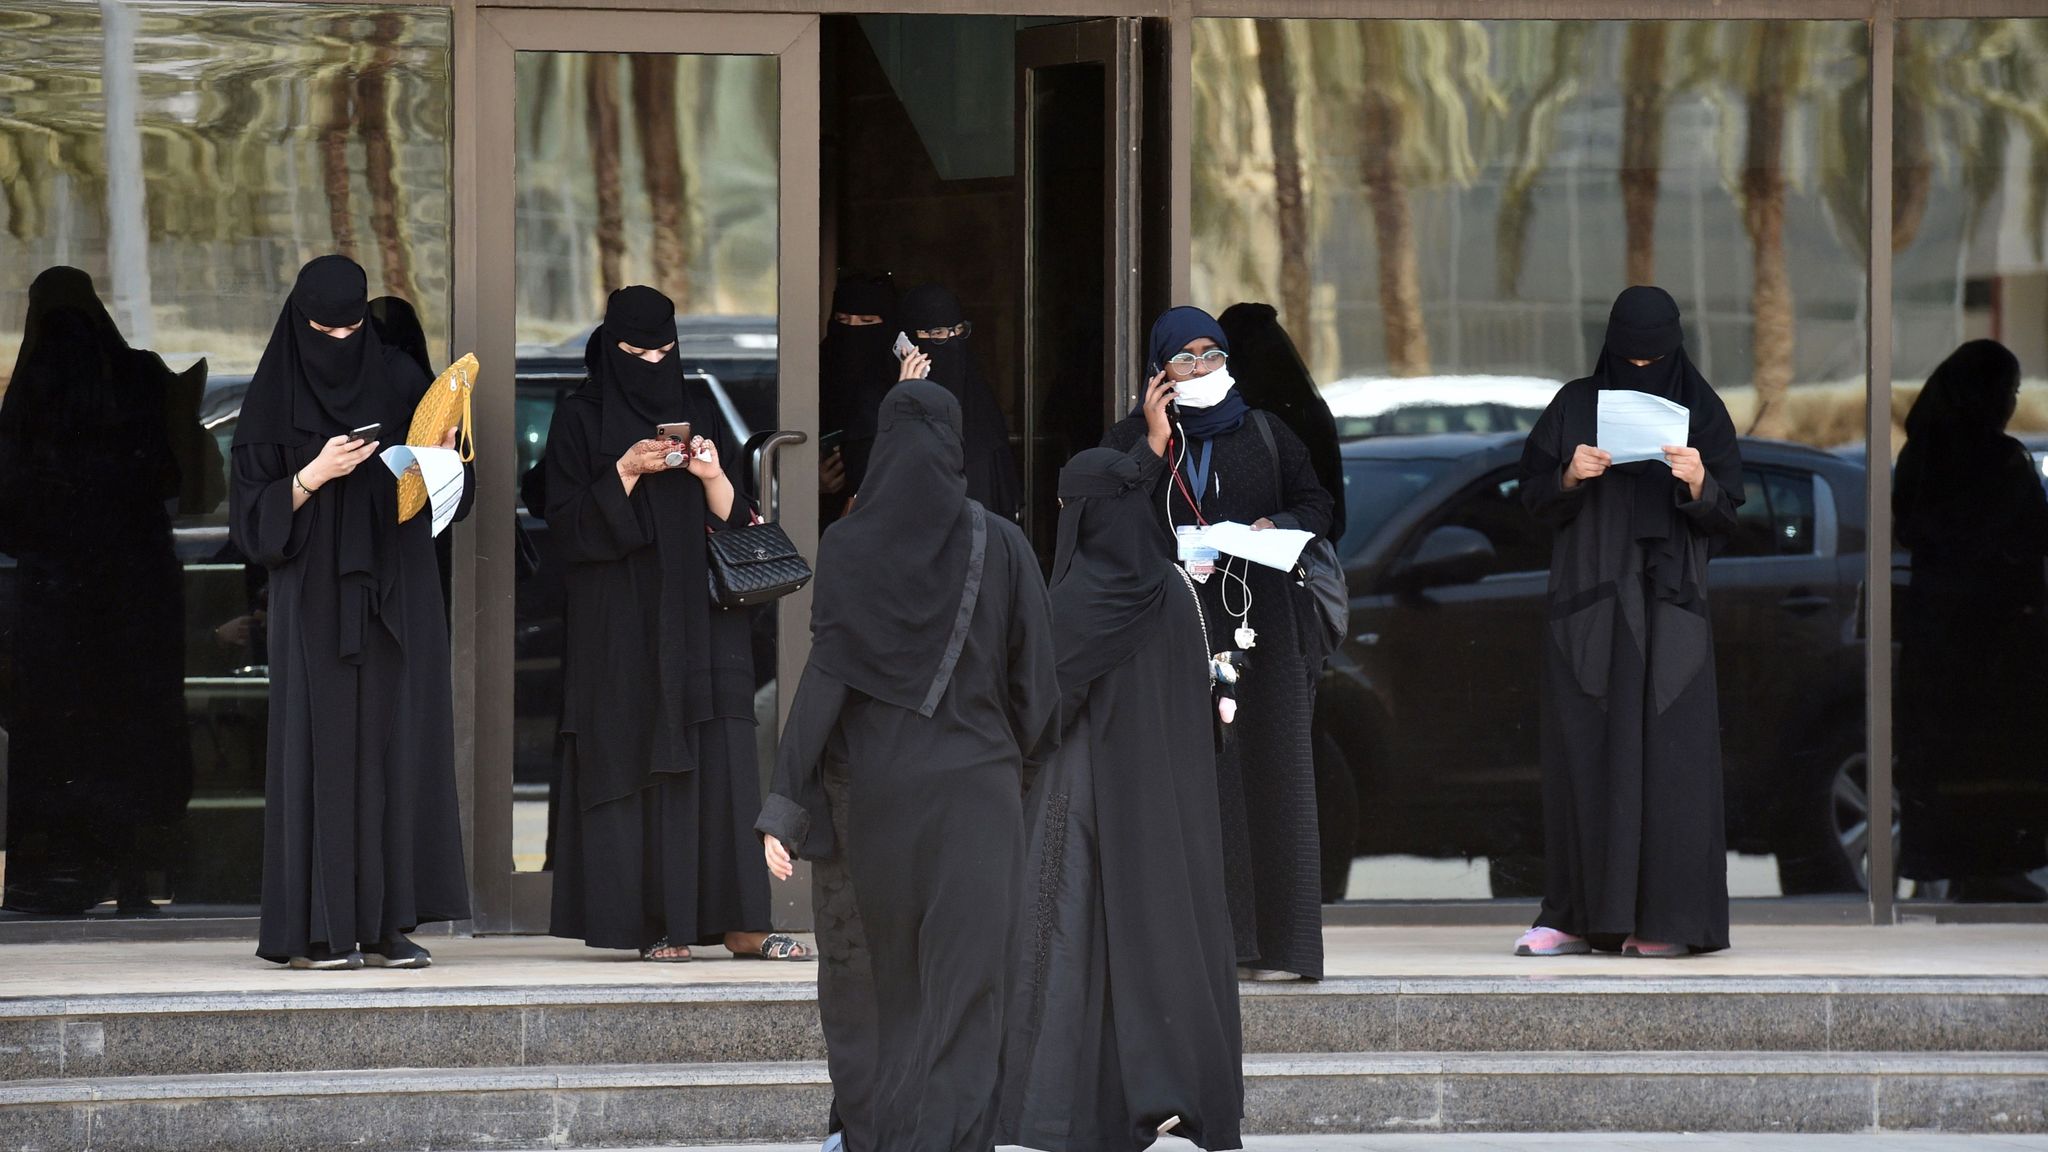 Women are now allowed to join the armed forces in Saudi Arabia. 